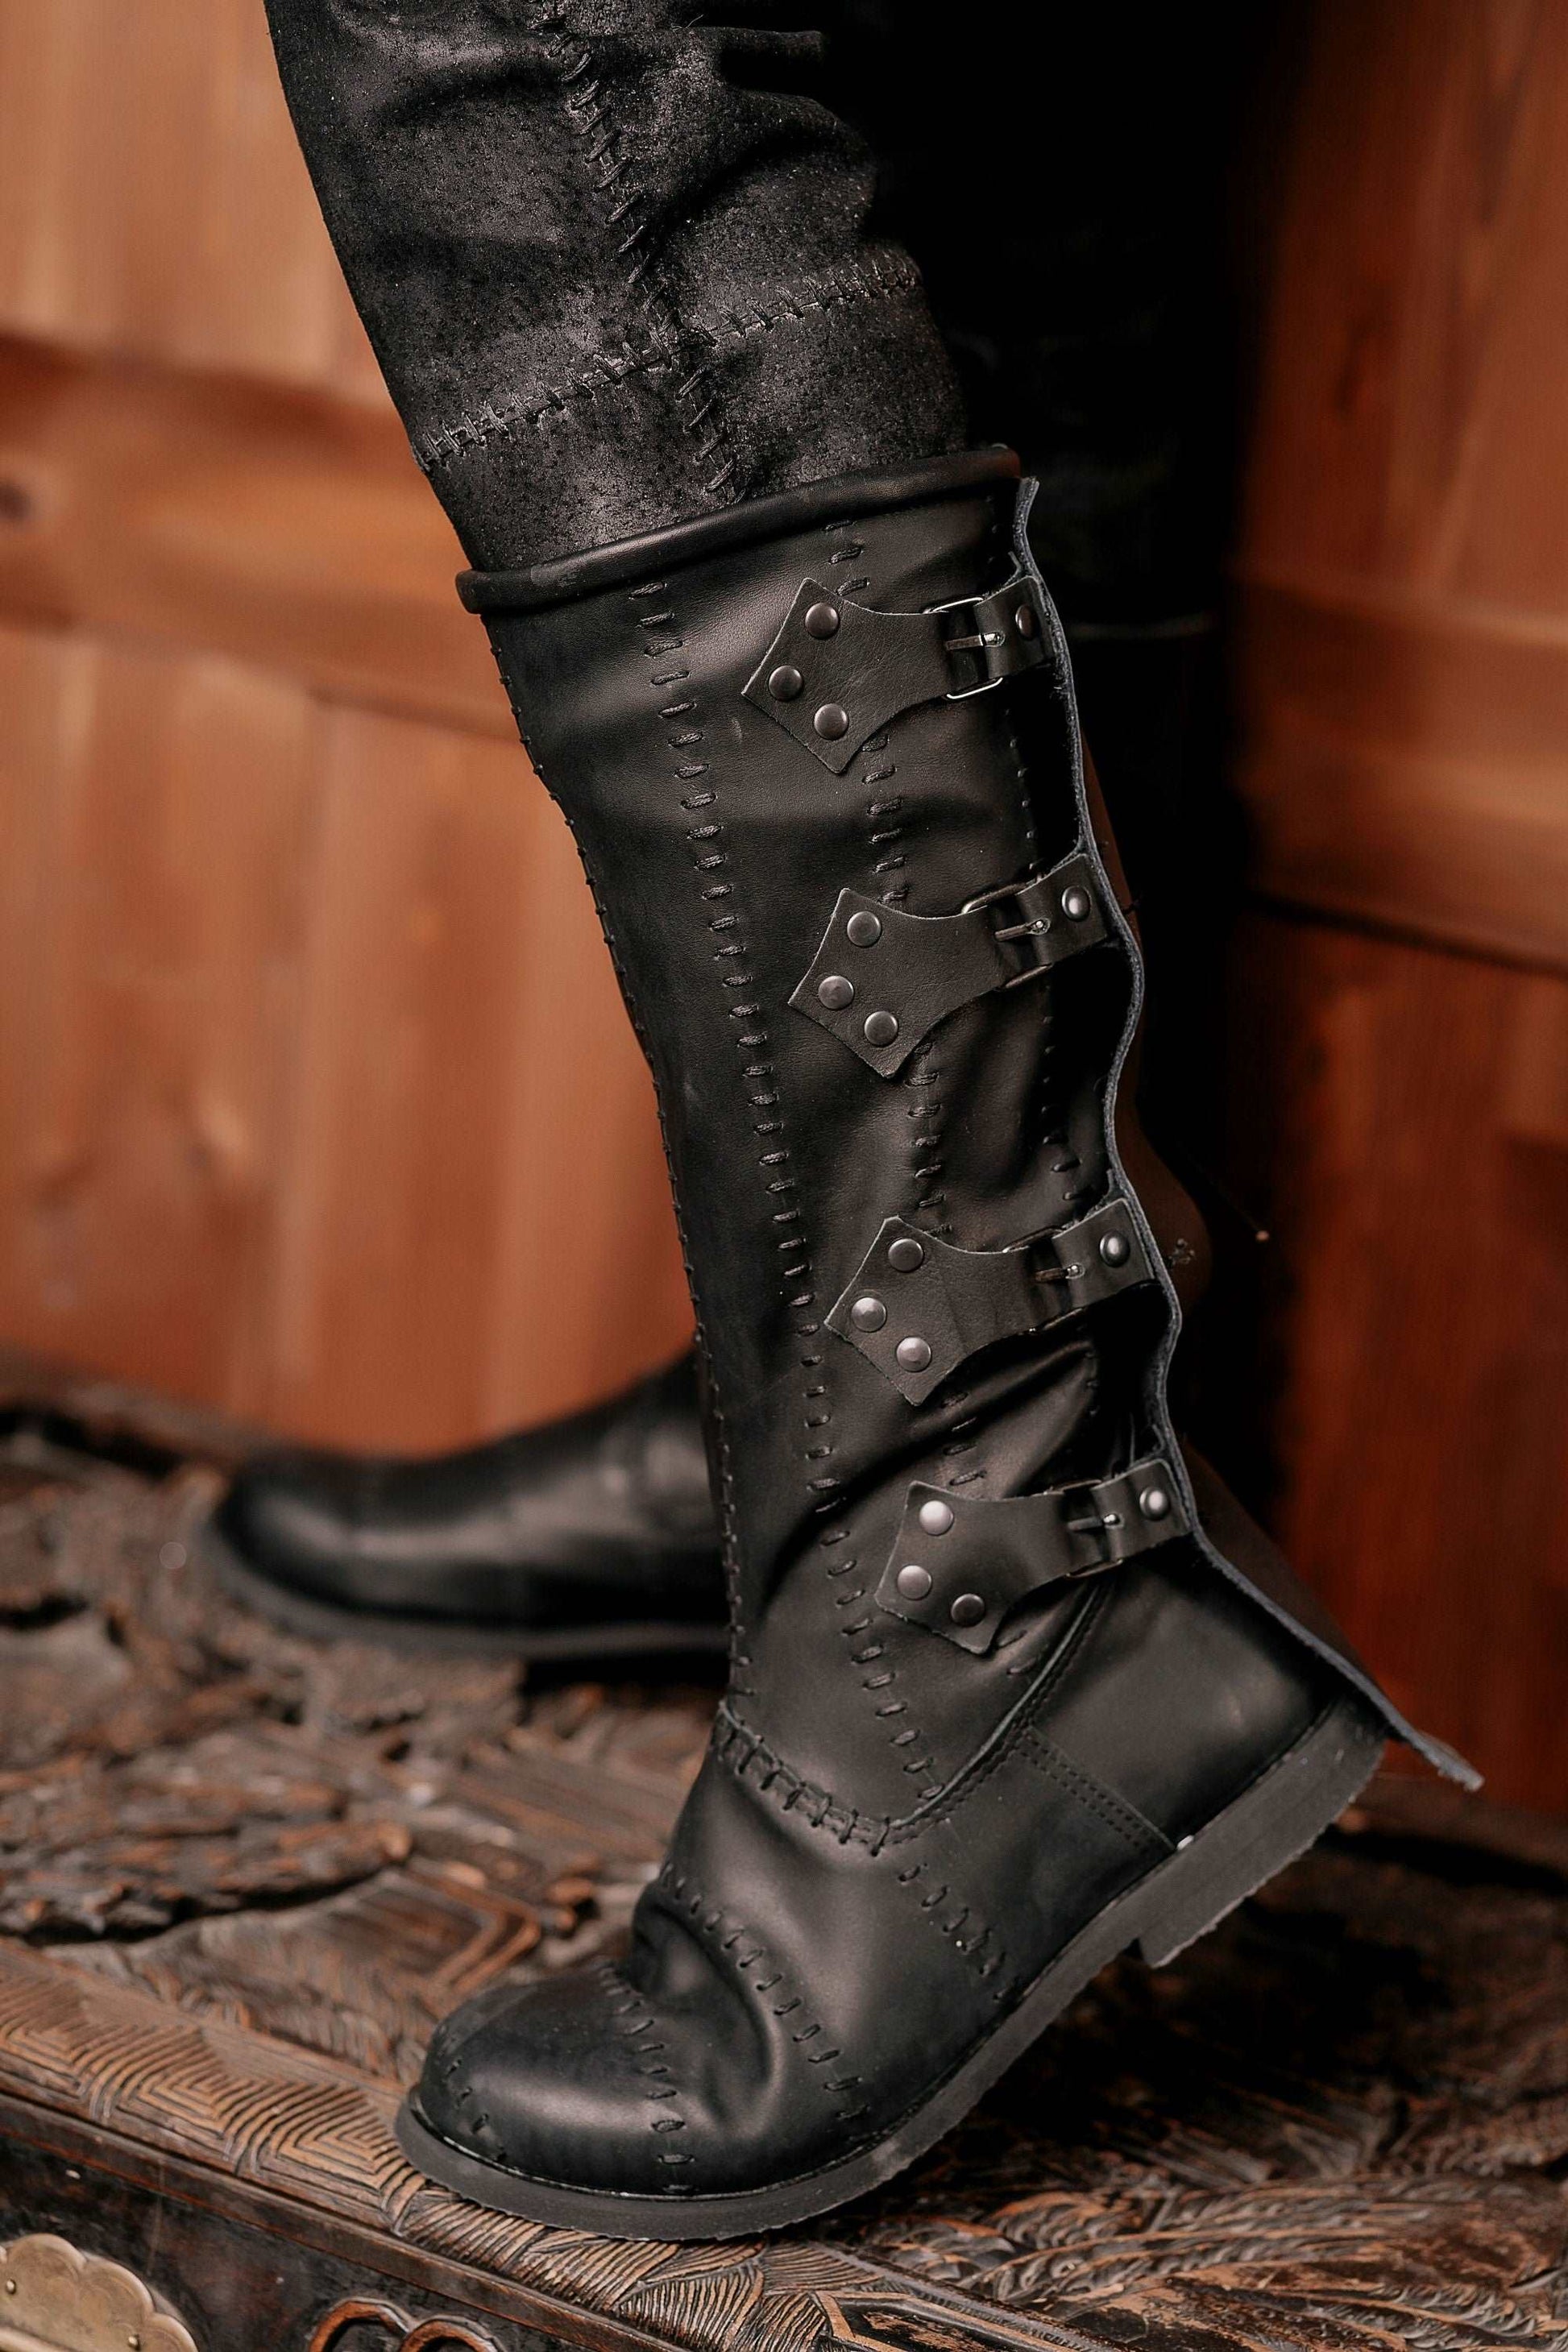 Black leather high boots with buckles